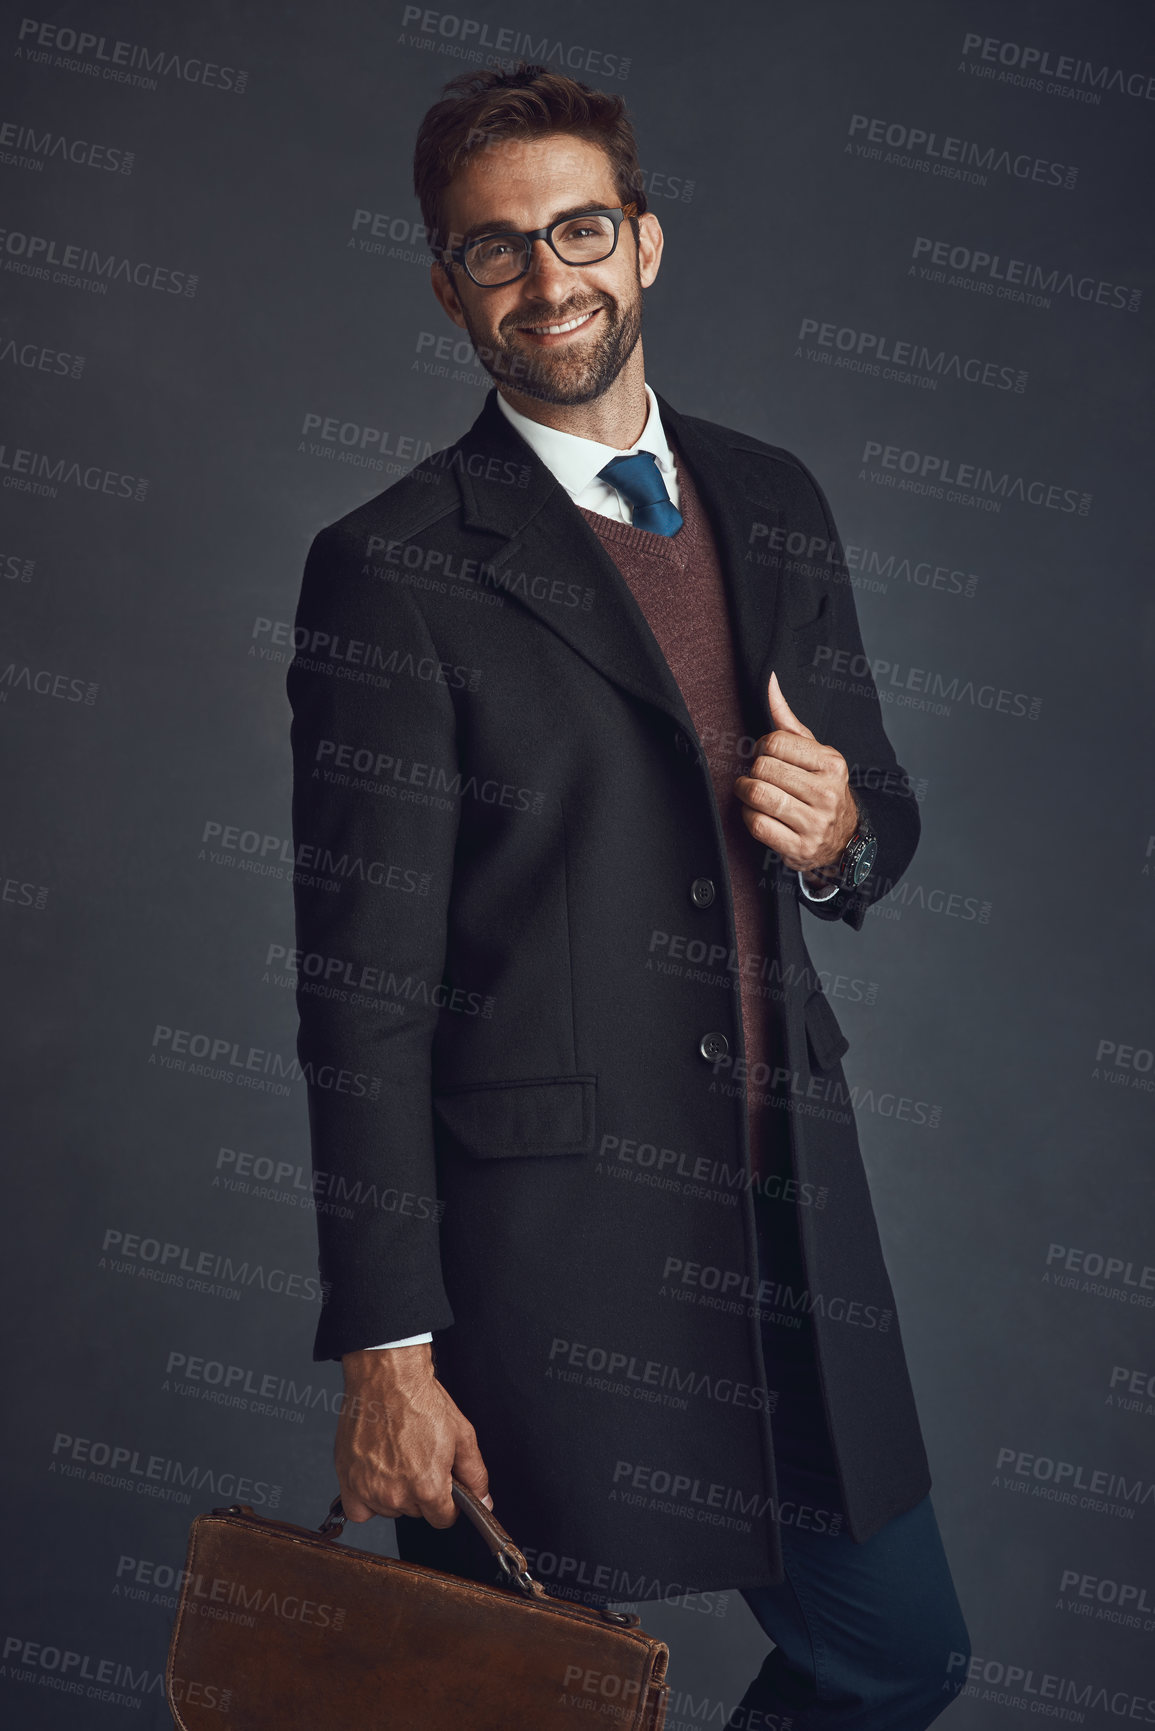 Buy stock photo Studio portrait of a stylishly dressed young man carrying a bag against a gray background